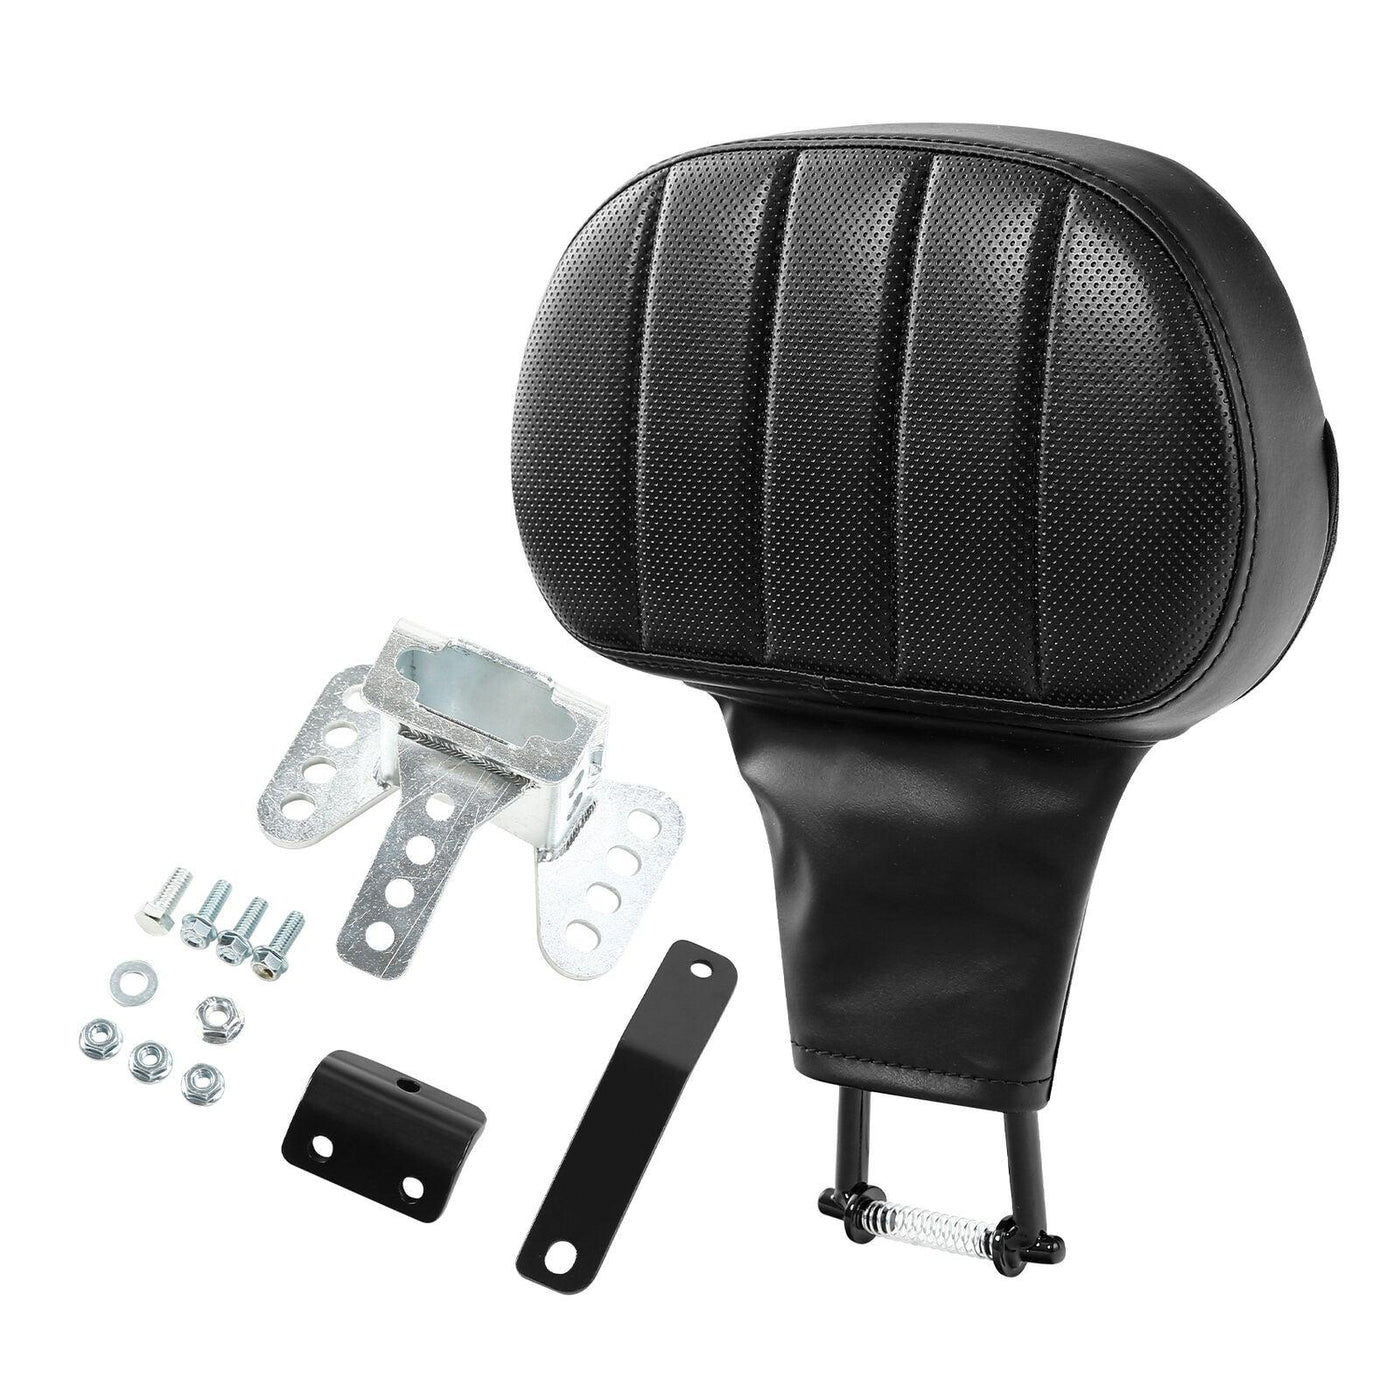 Quick Release Plug-in Driver Backrest Pad Fits For Harley Touring Glide 2009-22 - Moto Life Products